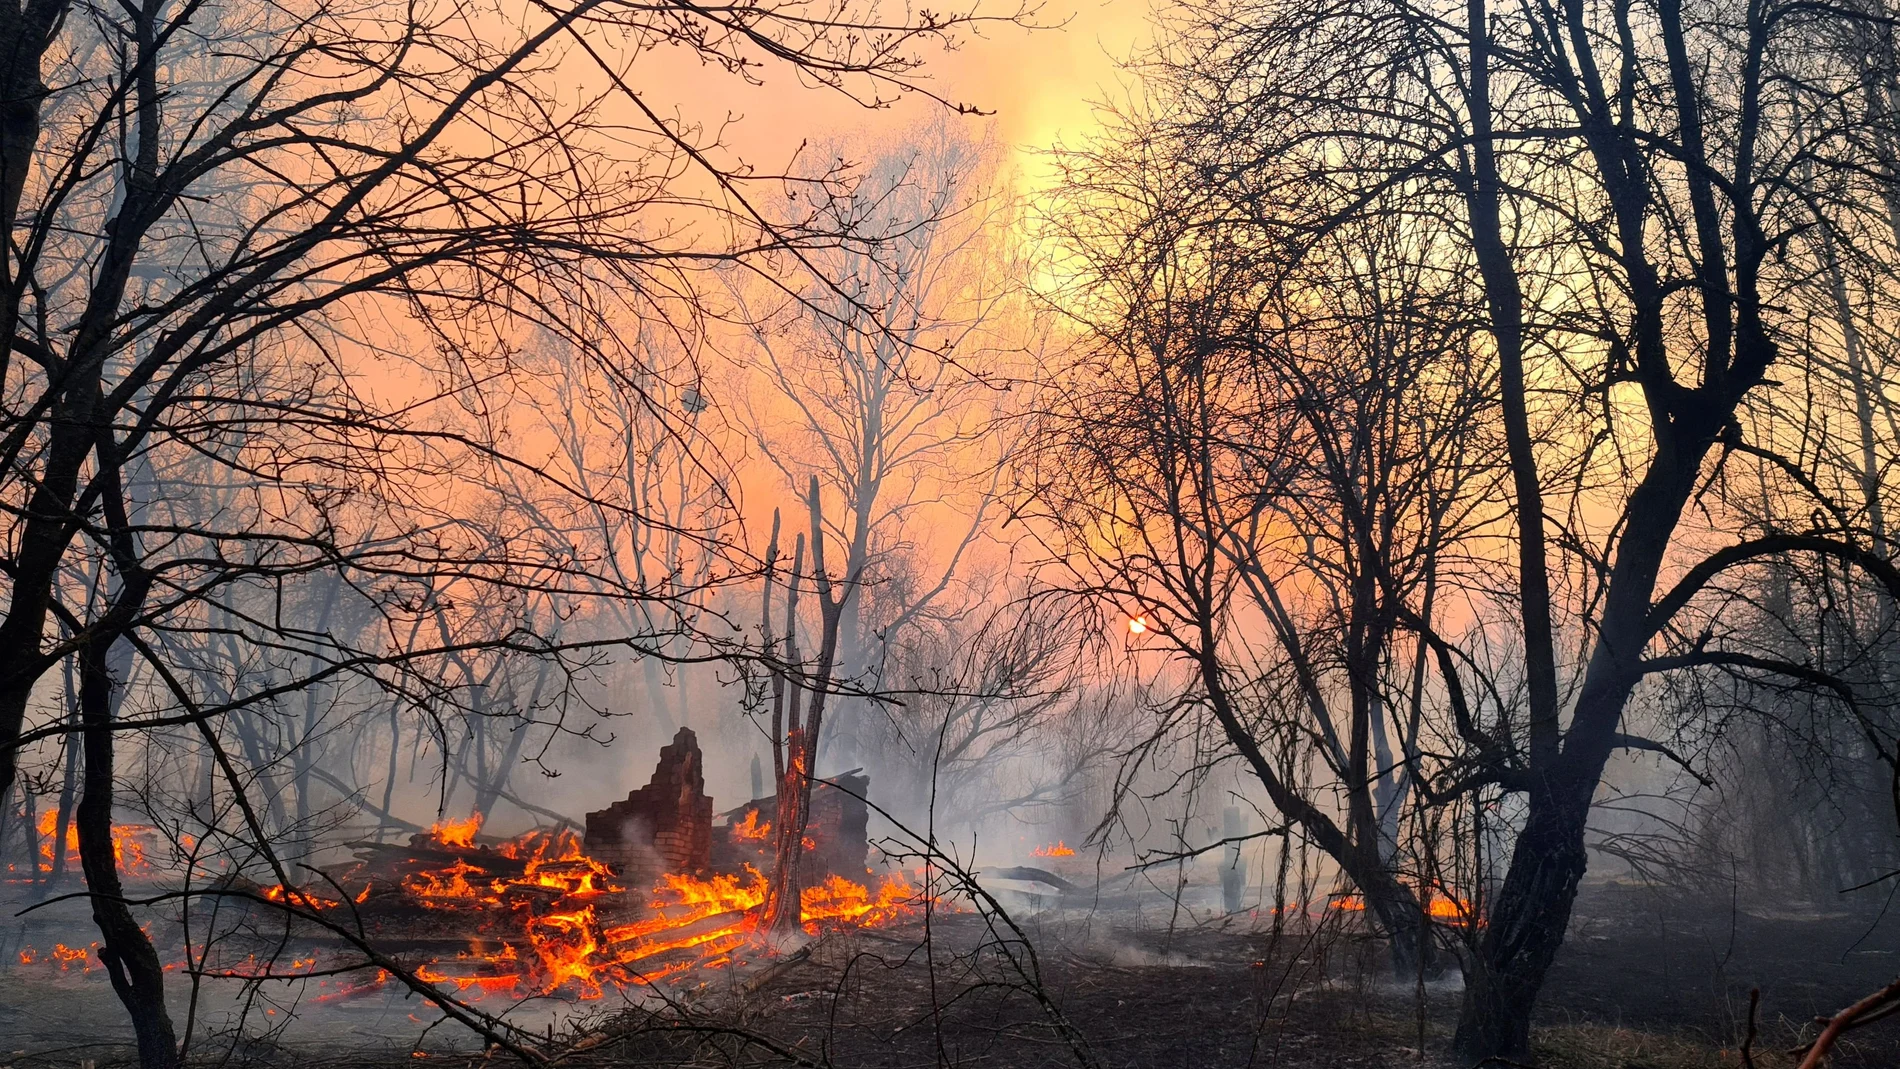 A fire burns in the exclusion zone around the Chernobyl nuclear power plant